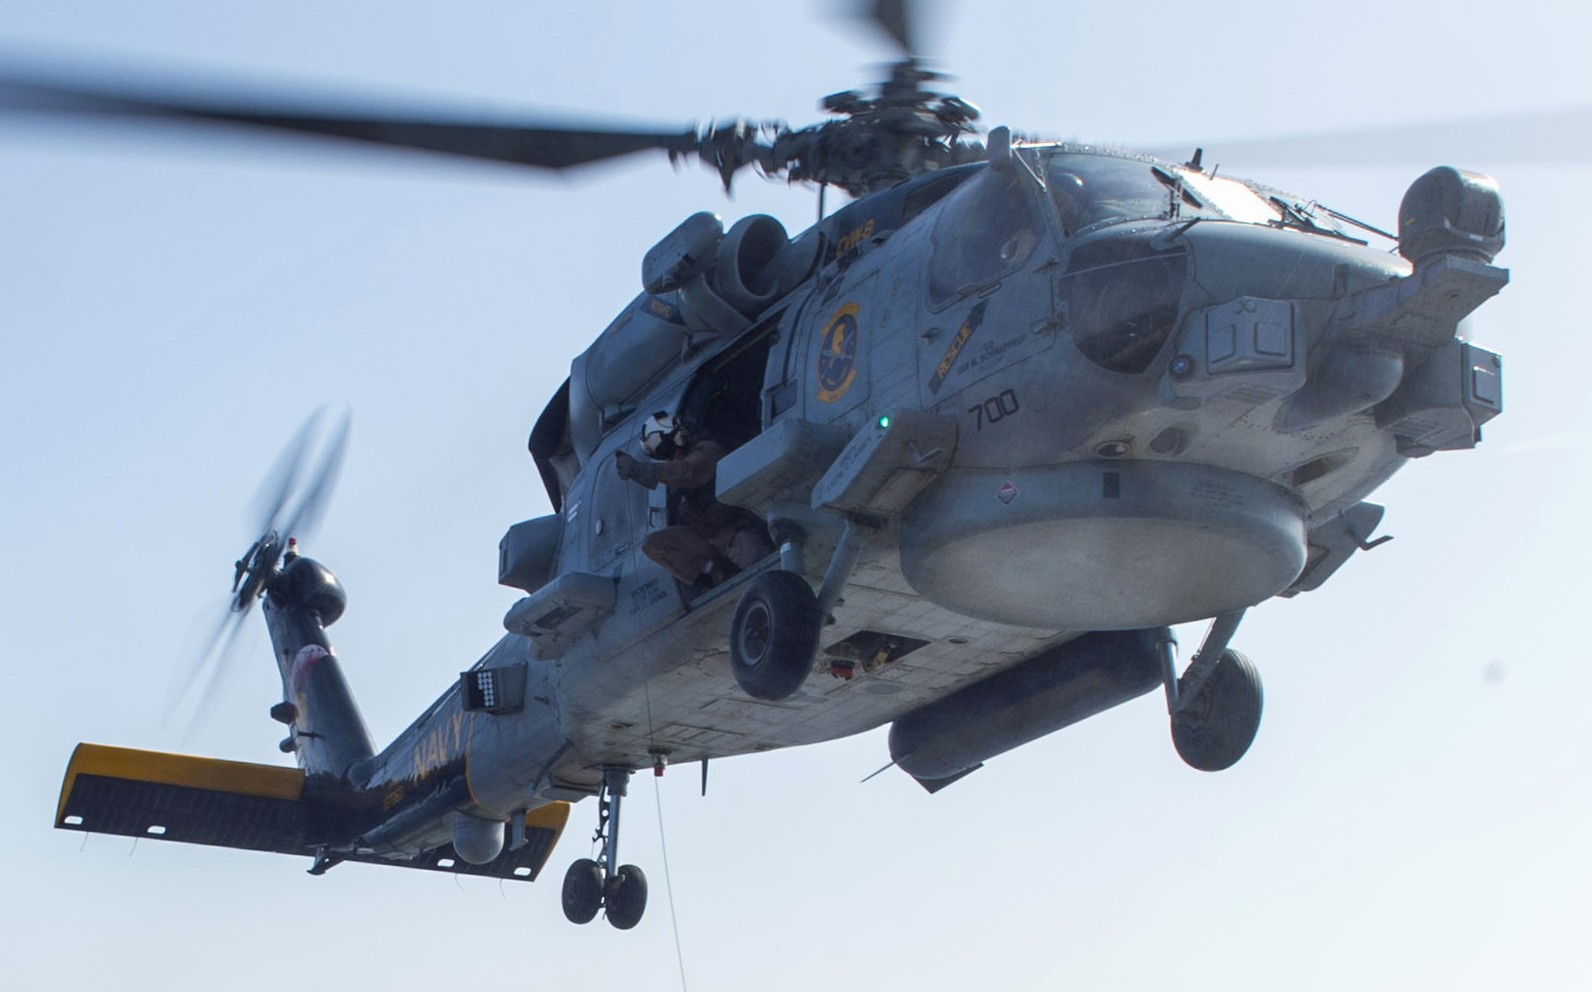 hsm-70 spartans helicopter maritime strike squadron mh-60r seahawk 2014 110